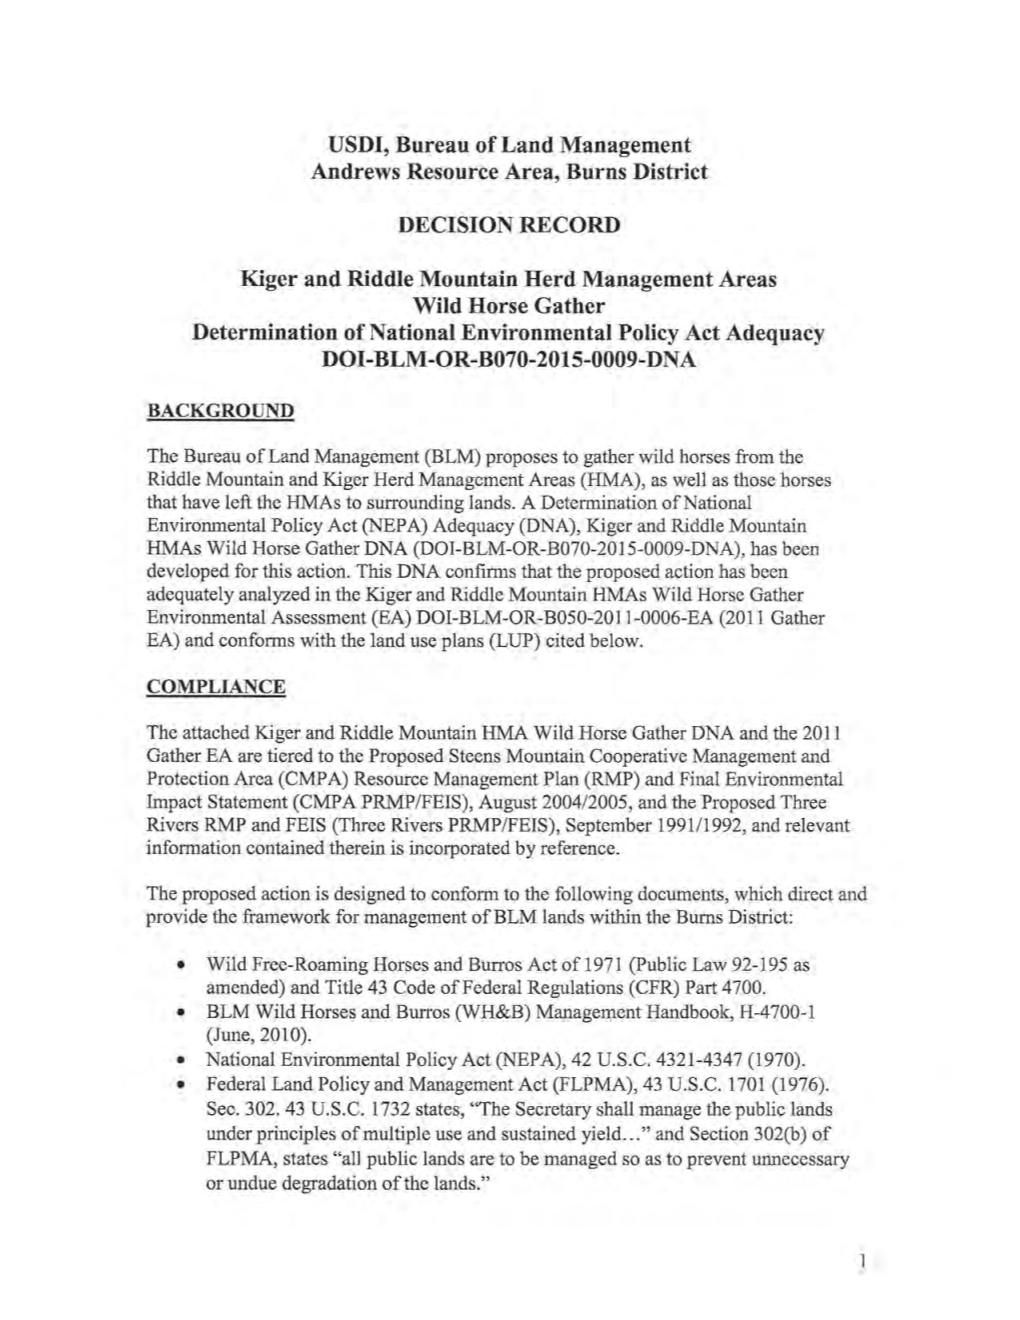 Kiger and Riddle Mountain Herd Management Areas Wild Horse Gather Determination of National Environmental Policy Act Adequacy DOI-BLM-OR-B070-2015-0009-DNA